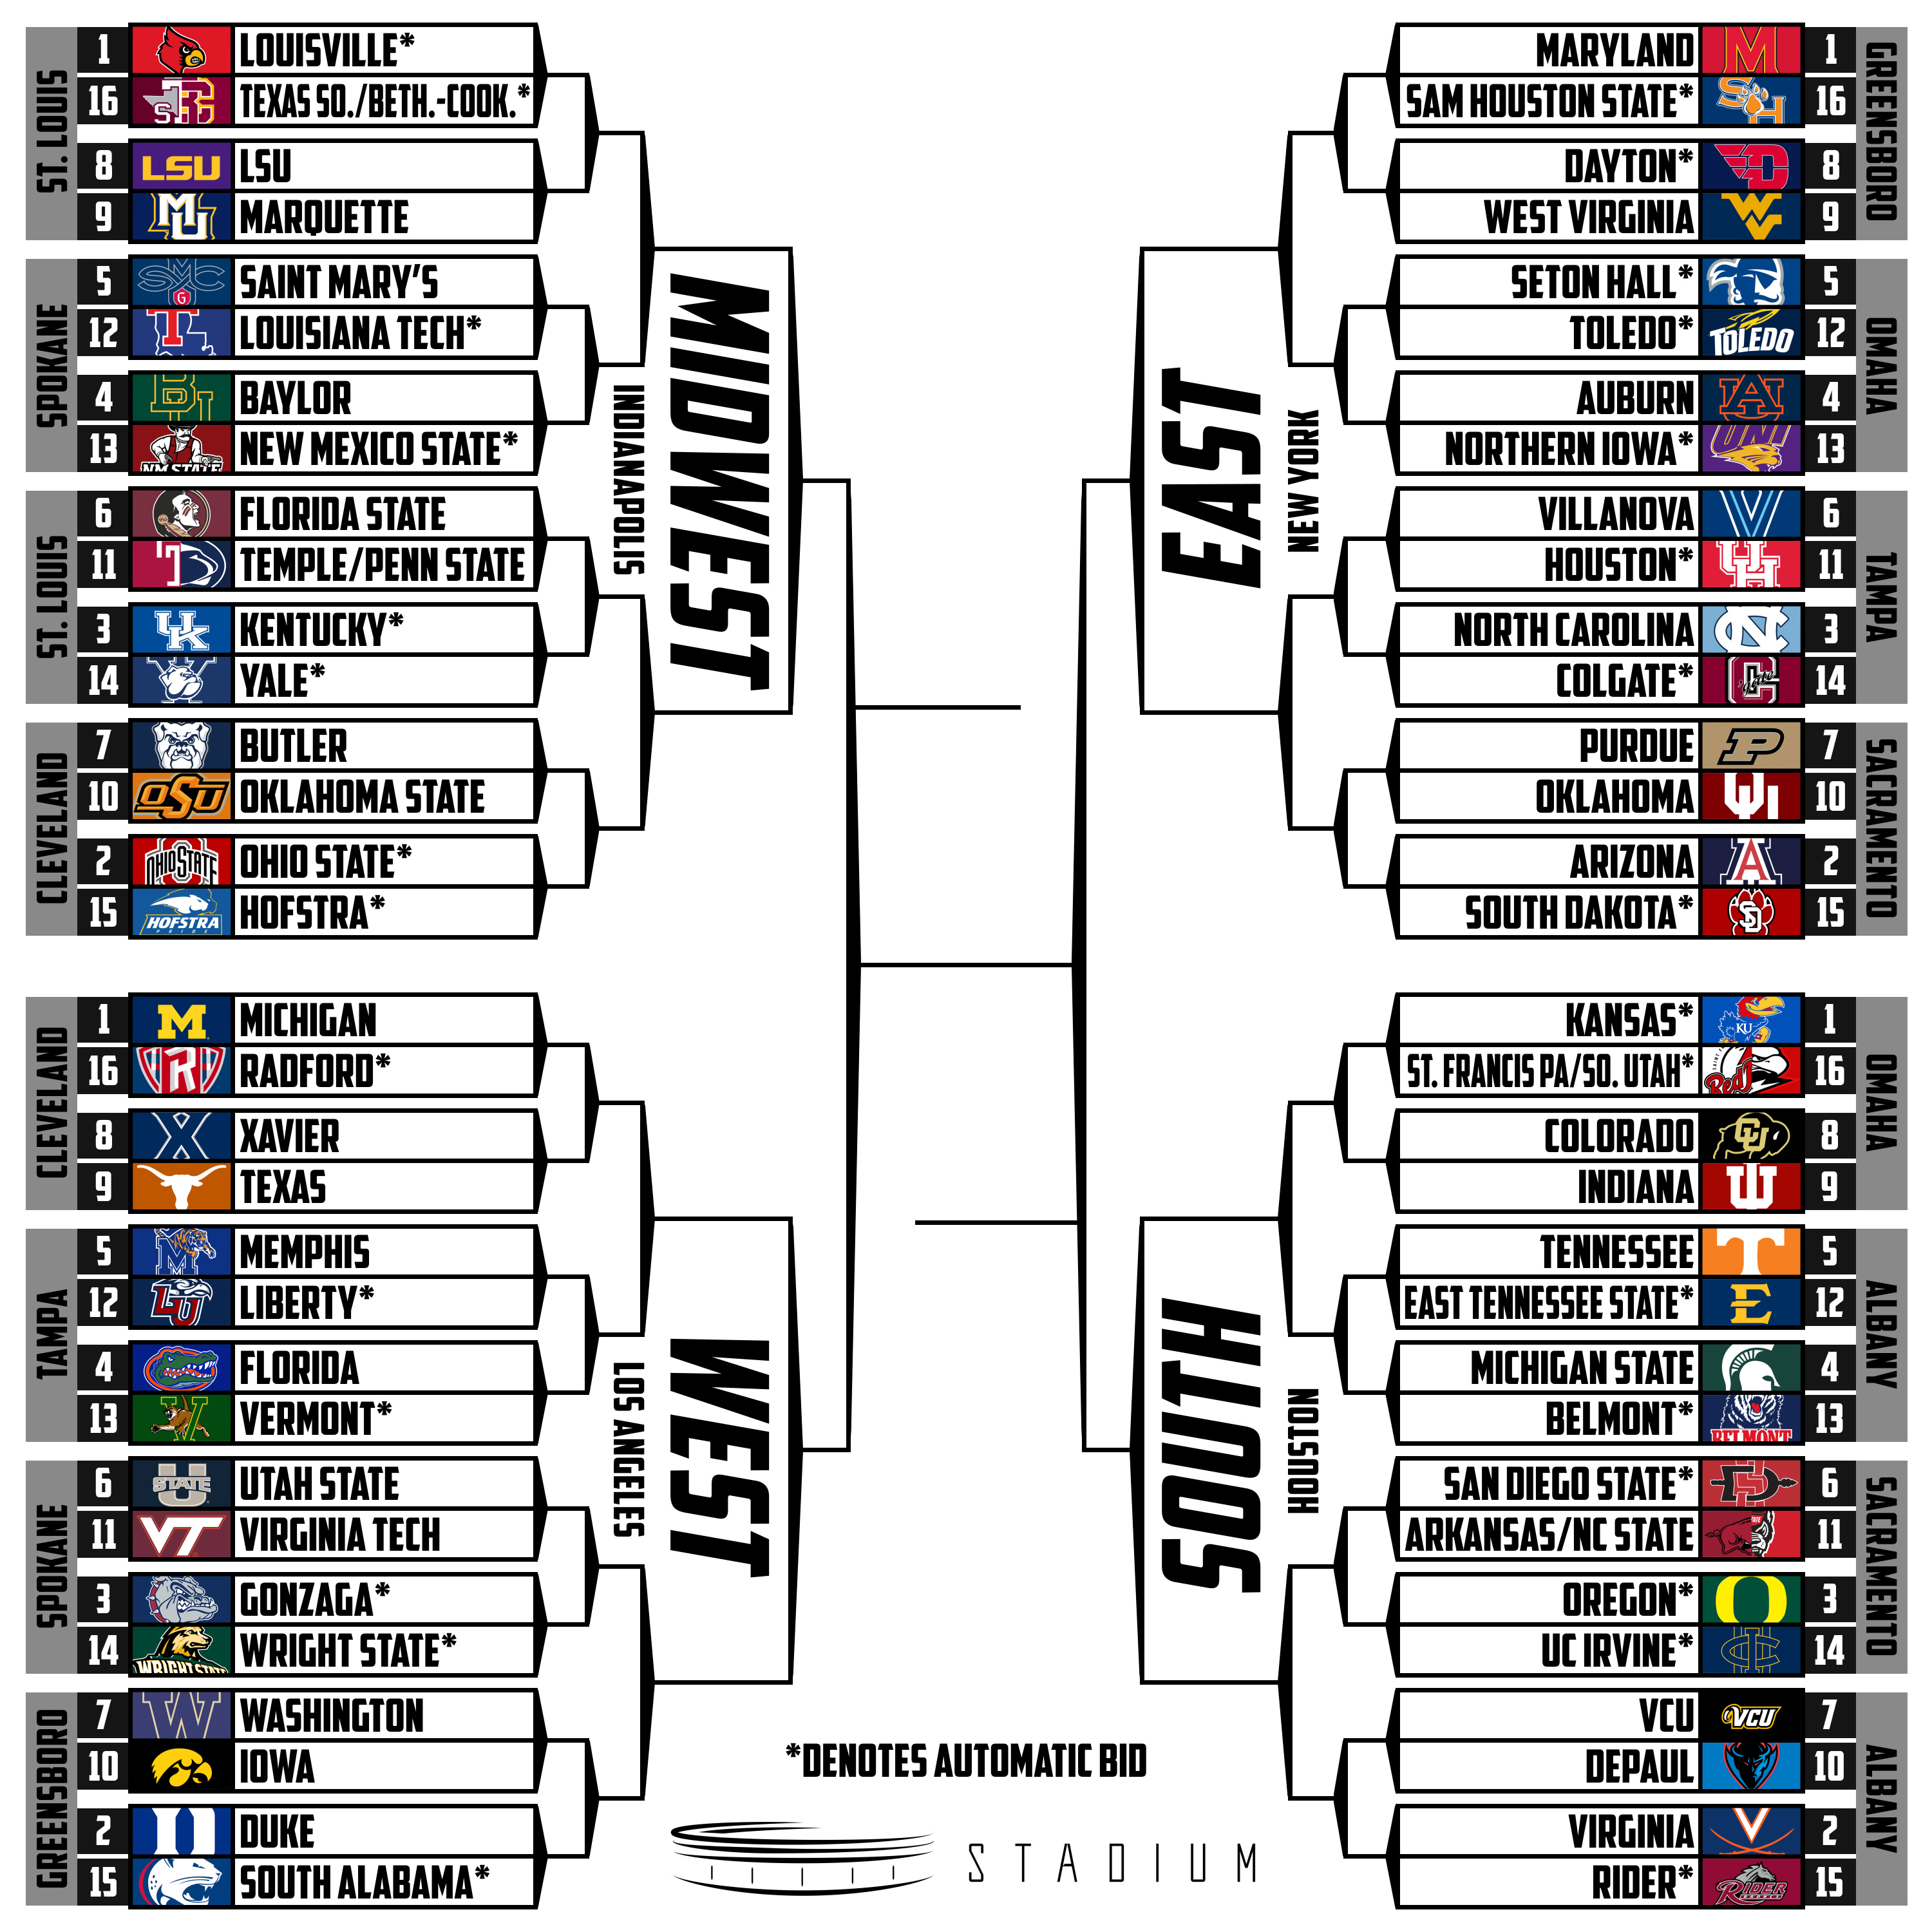 Here's What the March Madness Bracket Could Look Like at the End of the